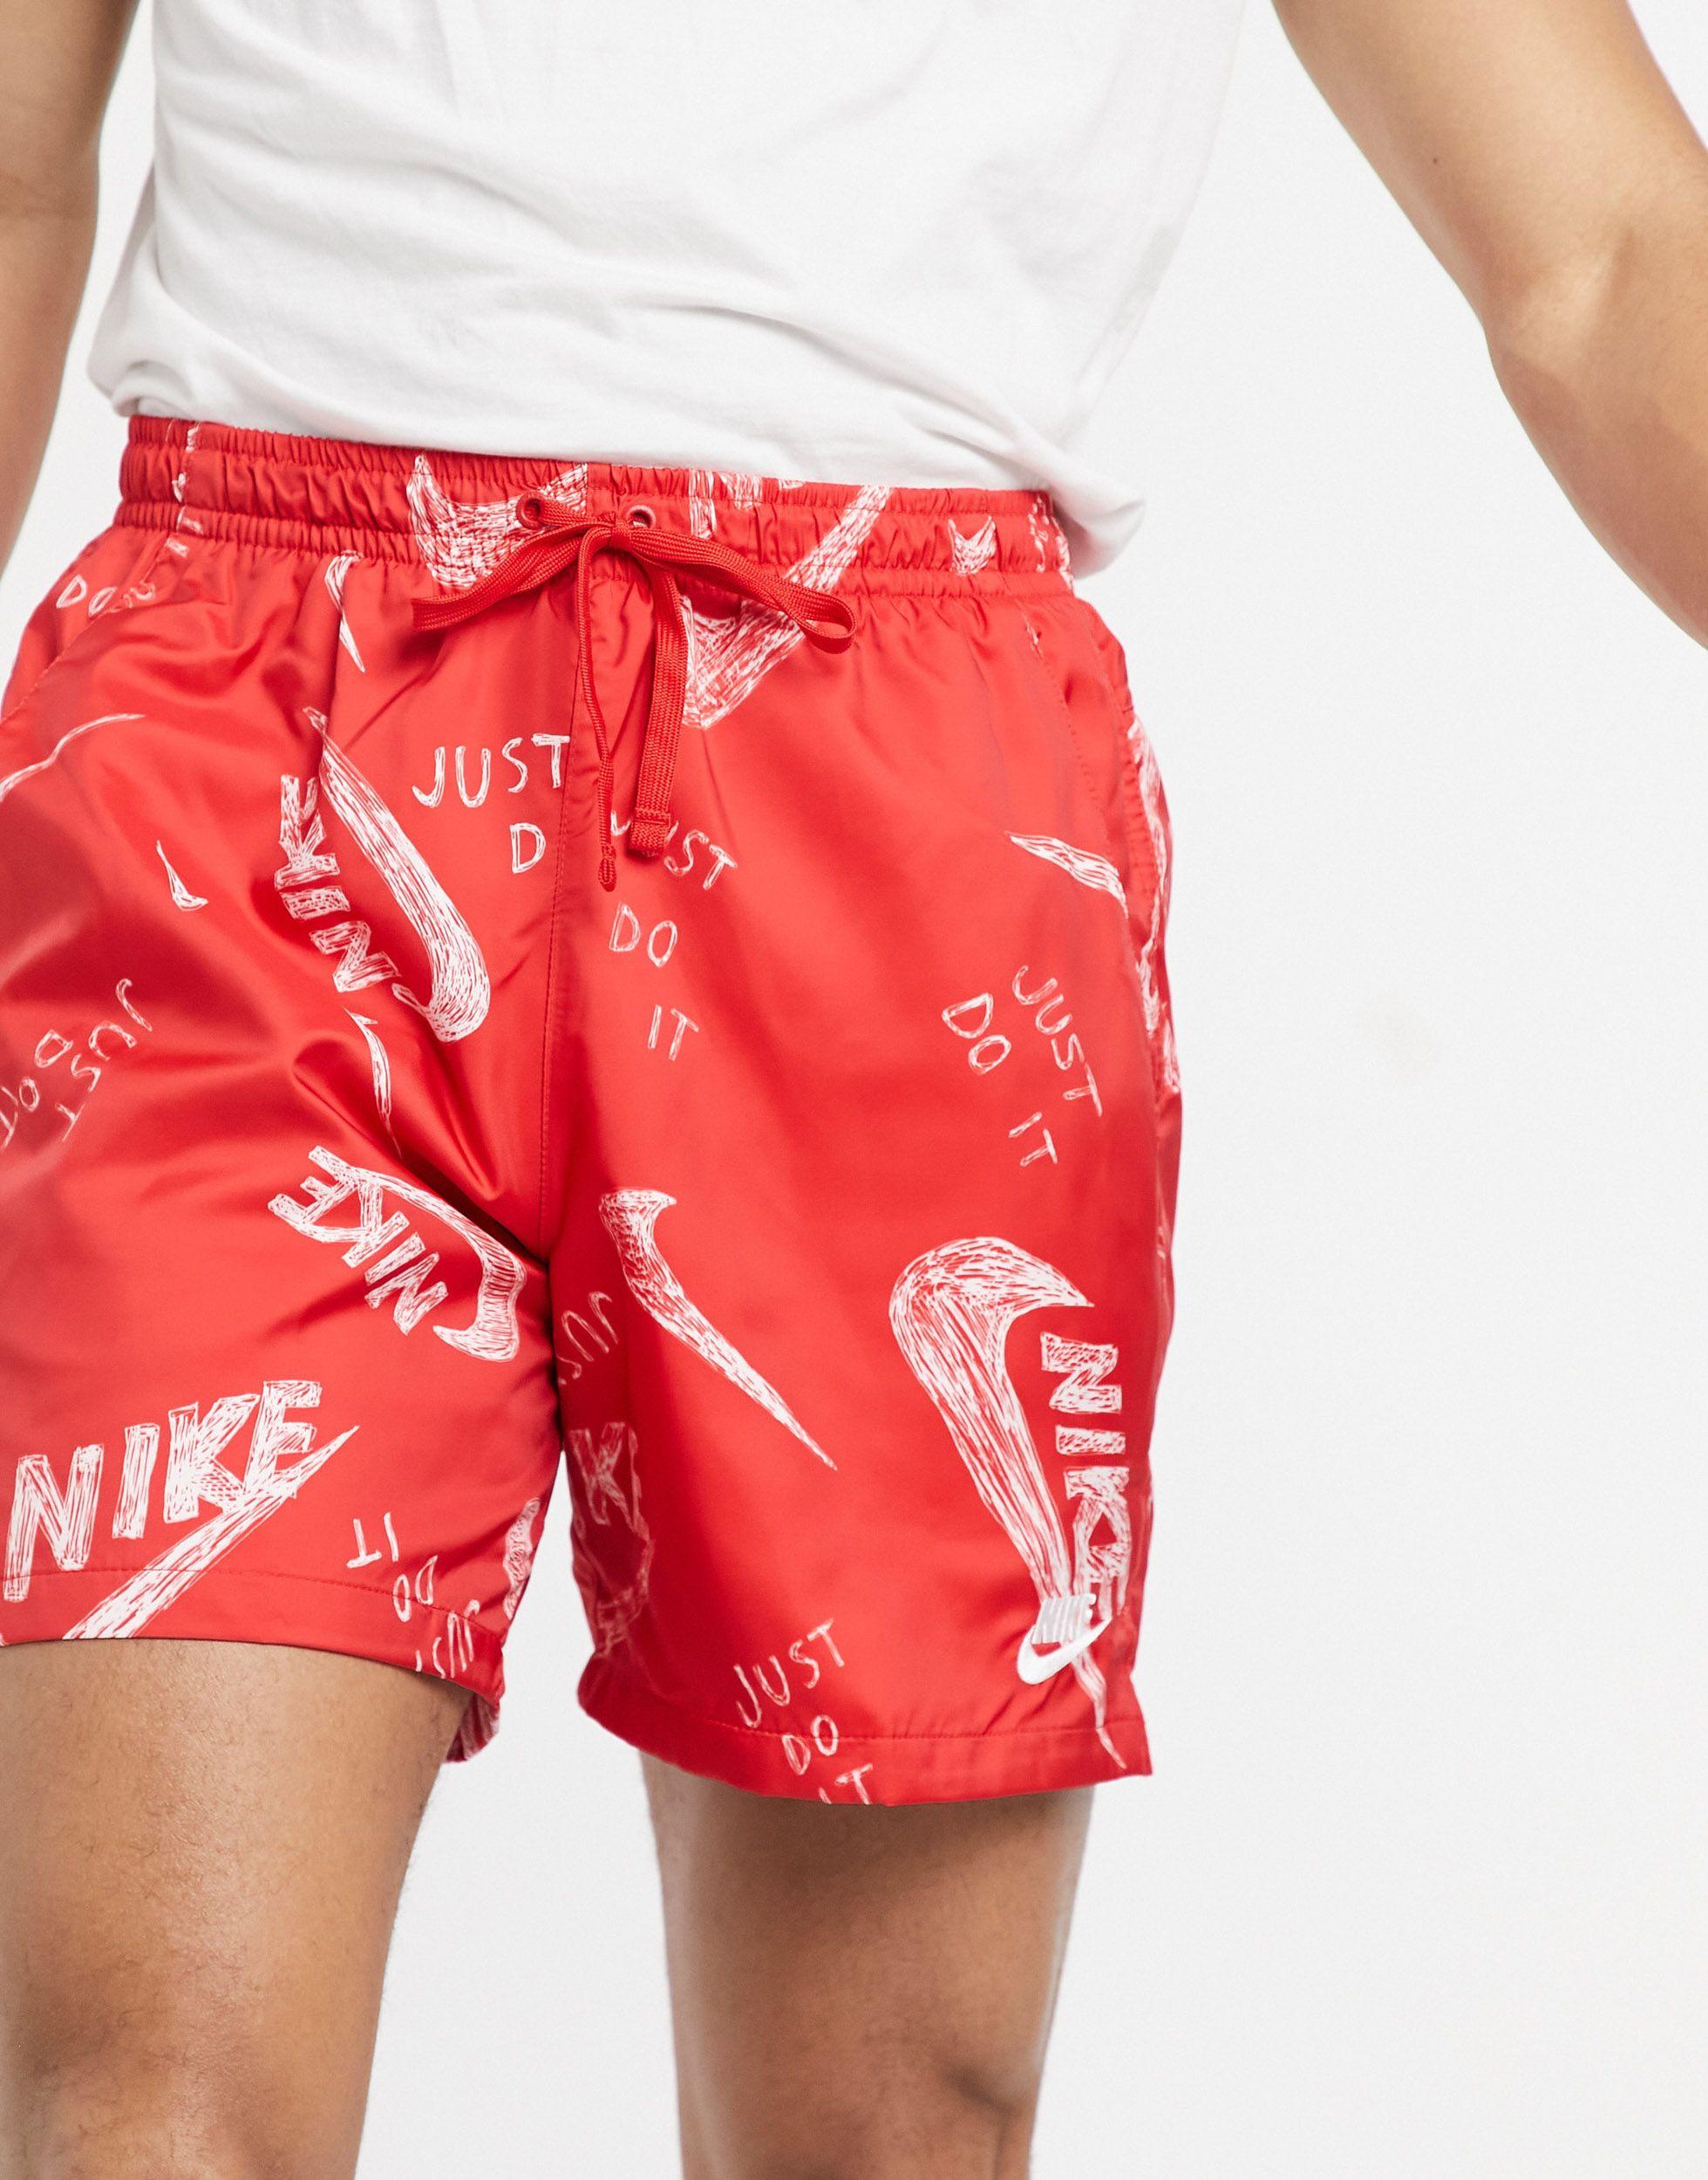 Bezit postkantoor geroosterd brood Nike All Over Logo Print Woven Shorts in Red for Men | Lyst